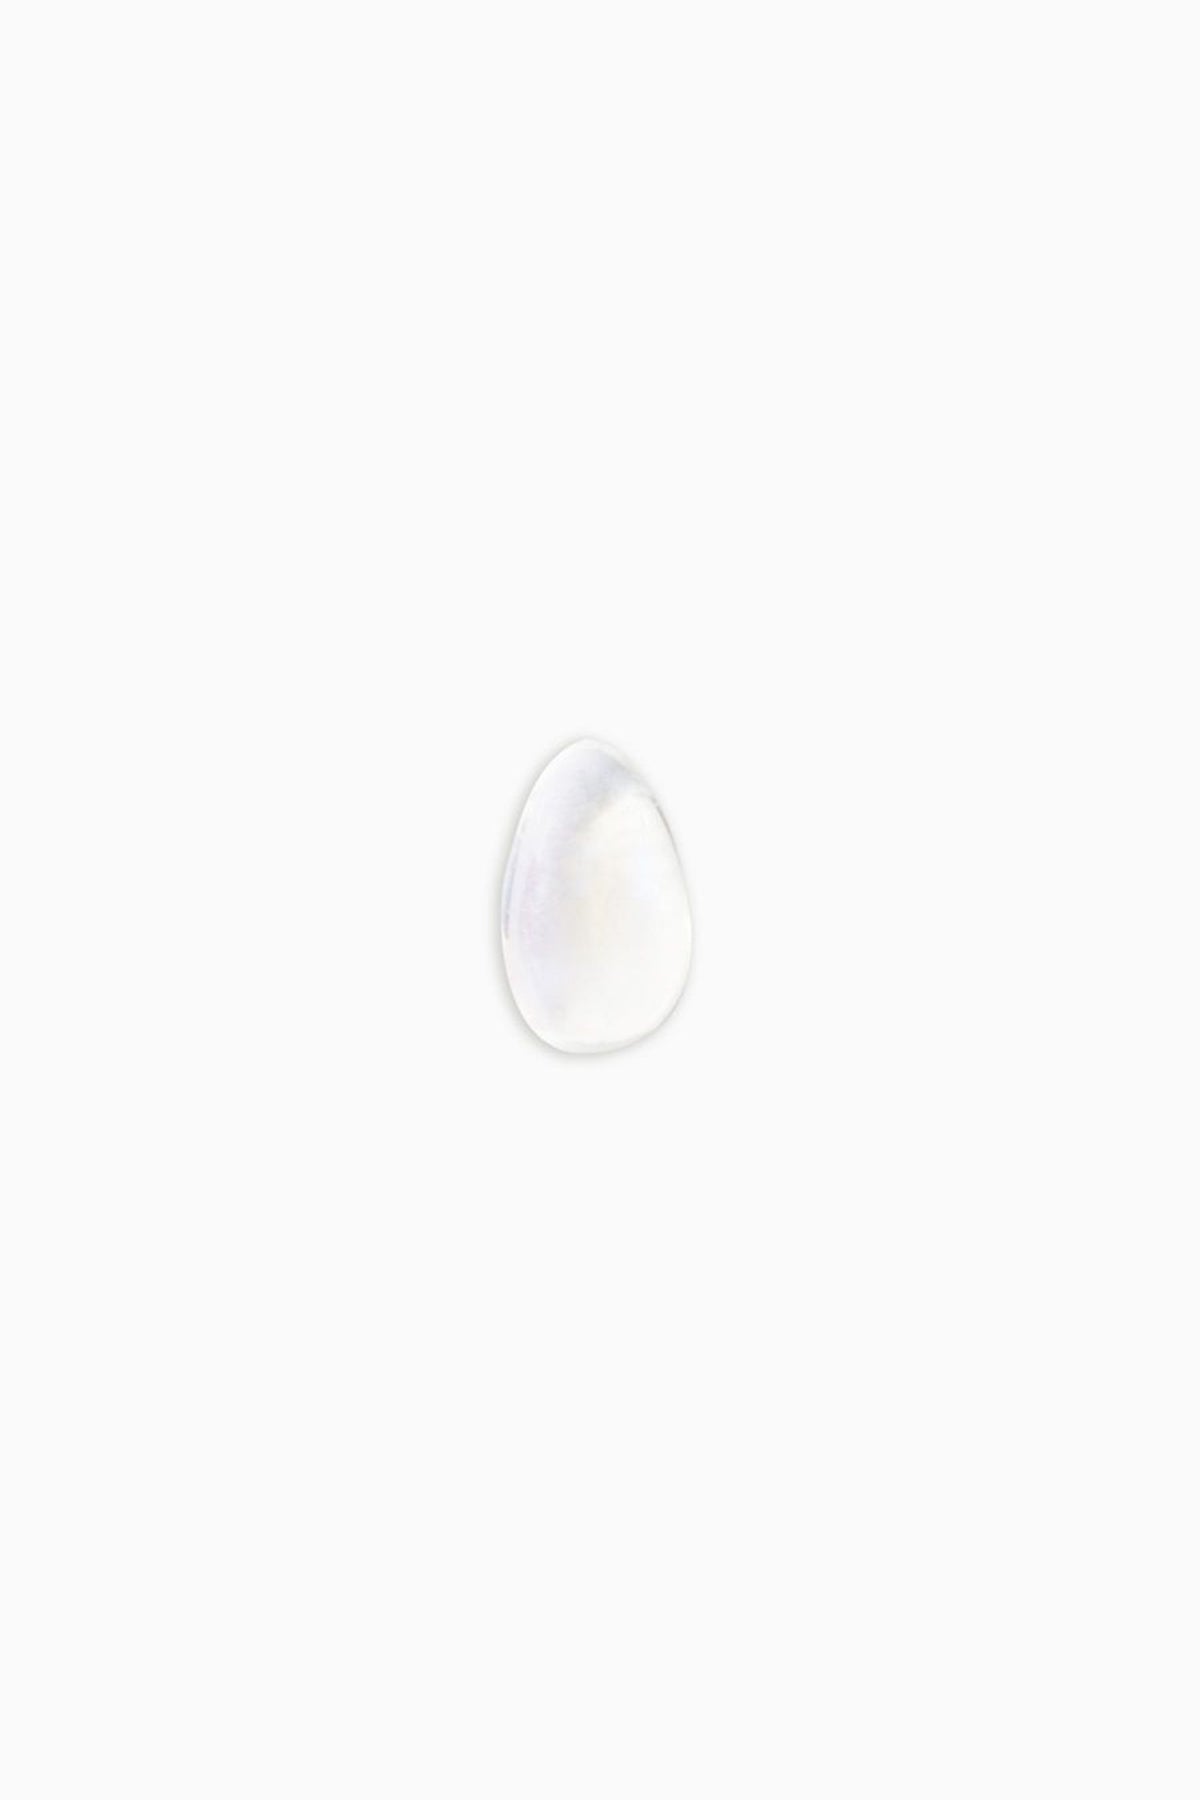 LOQUET LONDON | INTUITION MOONSTONE CHARM